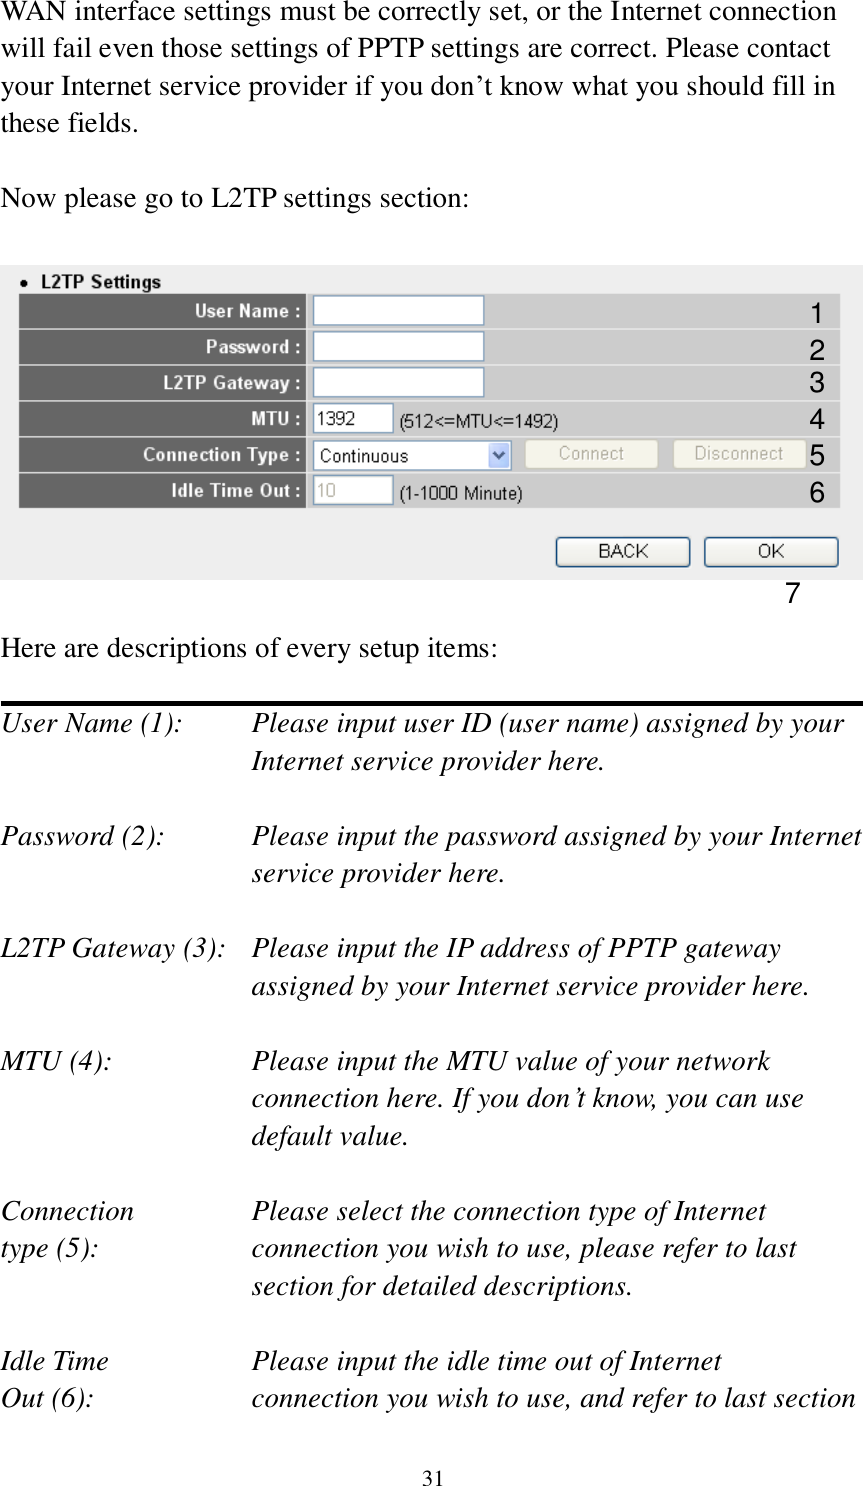 31 WAN interface settings must be correctly set, or the Internet connection will fail even those settings of PPTP settings are correct. Please contact your Internet service provider if you don‟t know what you should fill in these fields.  Now please go to L2TP settings section:    Here are descriptions of every setup items:  User Name (1):     Please input user ID (user name) assigned by your           Internet service provider here.  Password (2):    Please input the password assigned by your Internet service provider here.  L2TP Gateway (3):   Please input the IP address of PPTP gateway assigned by your Internet service provider here.  MTU (4):    Please input the MTU value of your network connection here. If you don‟t know, you can use default value.  Connection       Please select the connection type of Internet type (5):    connection you wish to use, please refer to last section for detailed descriptions.  Idle Time        Please input the idle time out of Internet Out (6):    connection you wish to use, and refer to last section 1 2 4 3 5 7 6 